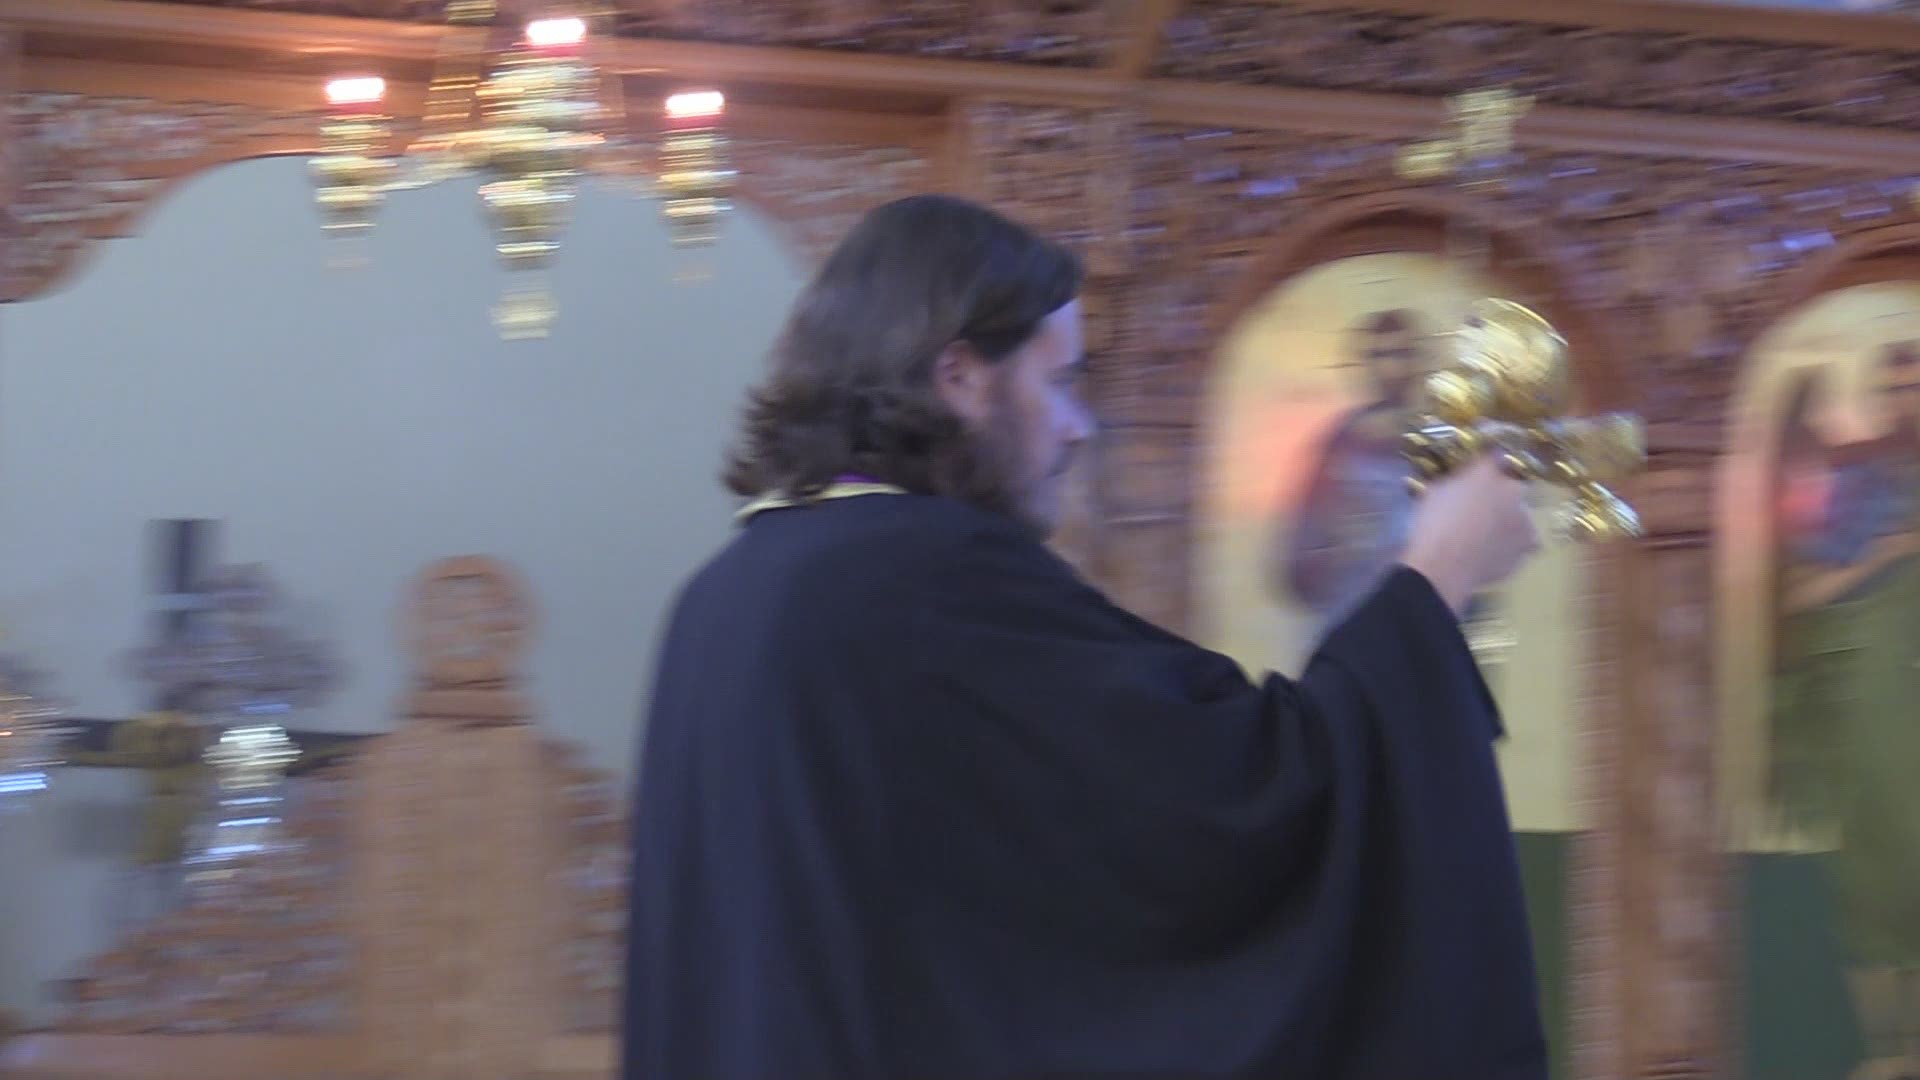 Here's a look at a traditional Greek Orthodox service held at Holy Cross Greek Orthodox Church in downtown Macon.